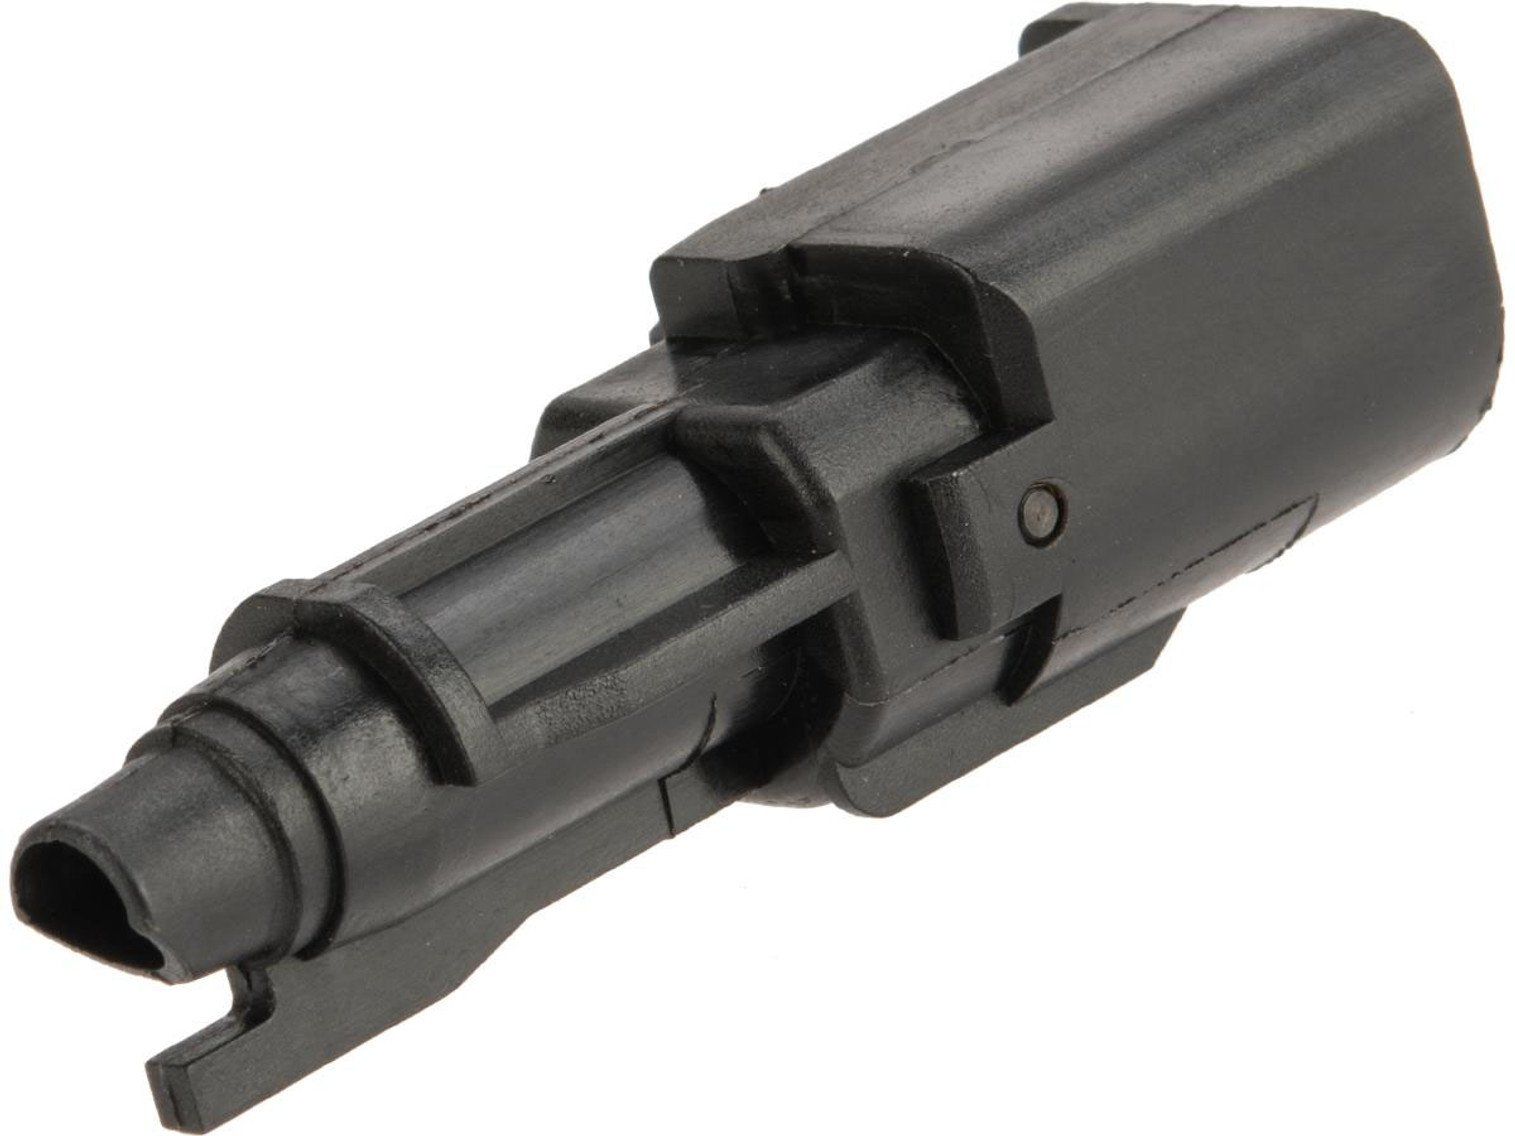 Replacement Loading Nozzle for Spartan & Elite Force GLOCK Licensed Blowback Airsoft Pistol